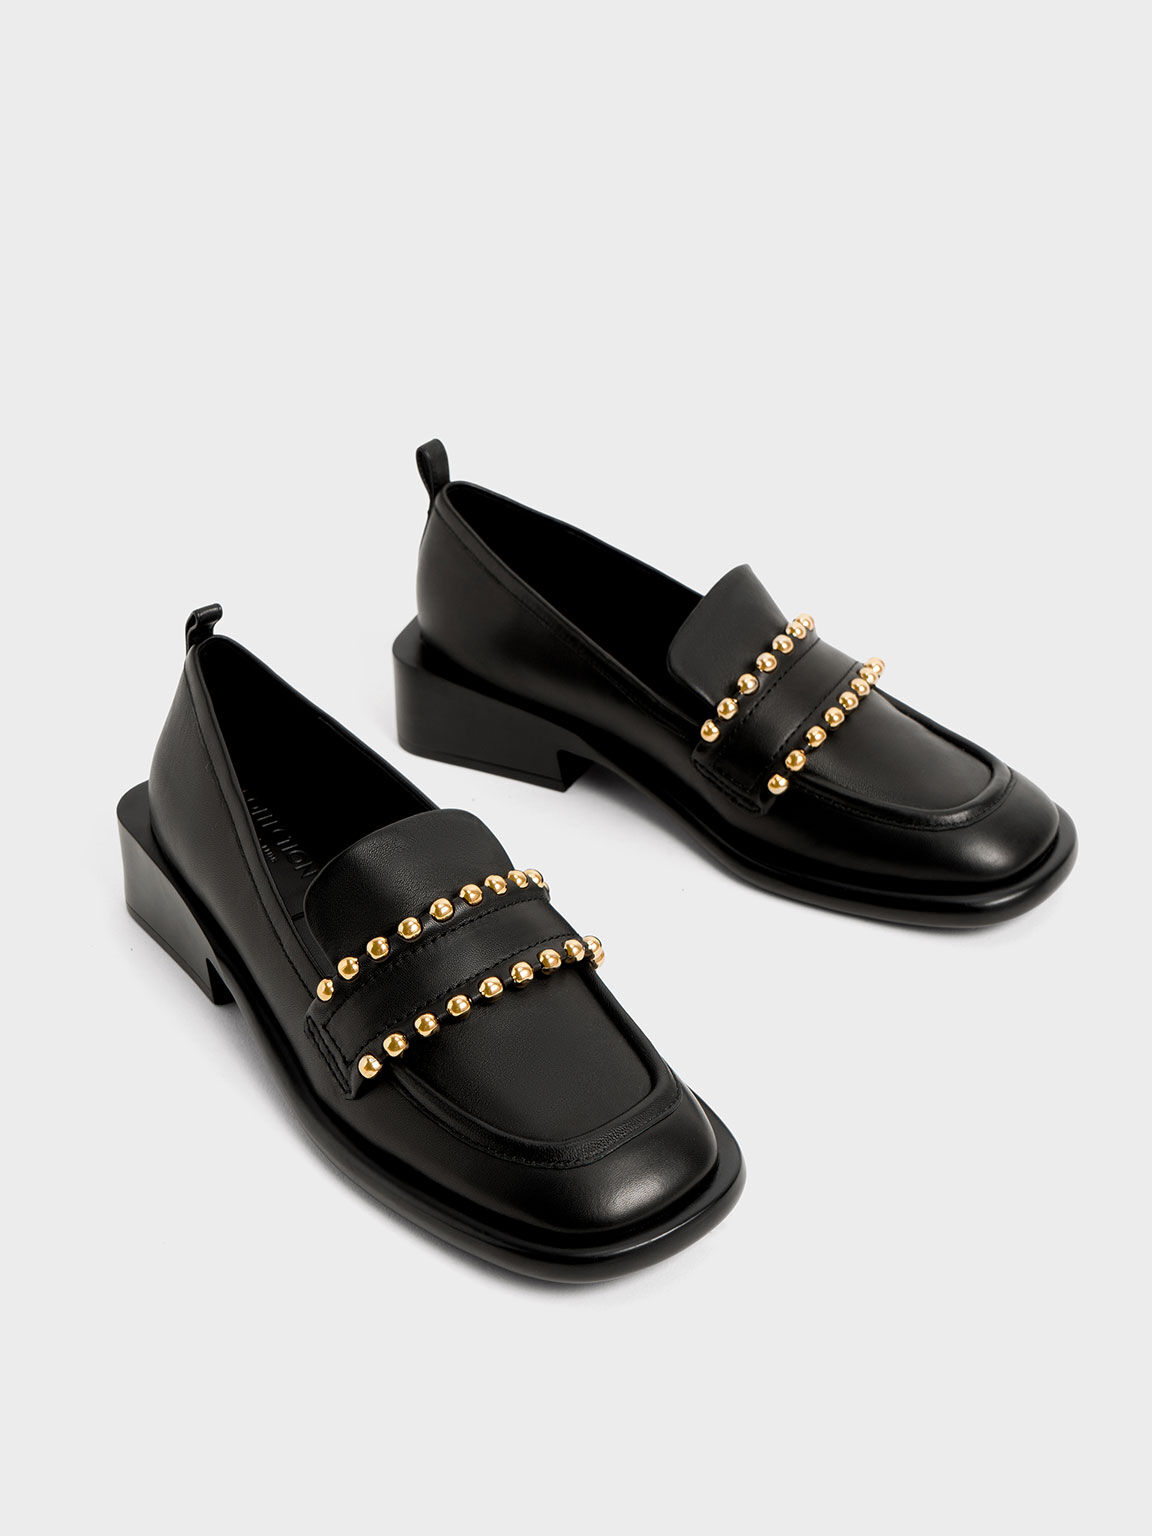 Studded Leather Penny Loafers, Black, hi-res